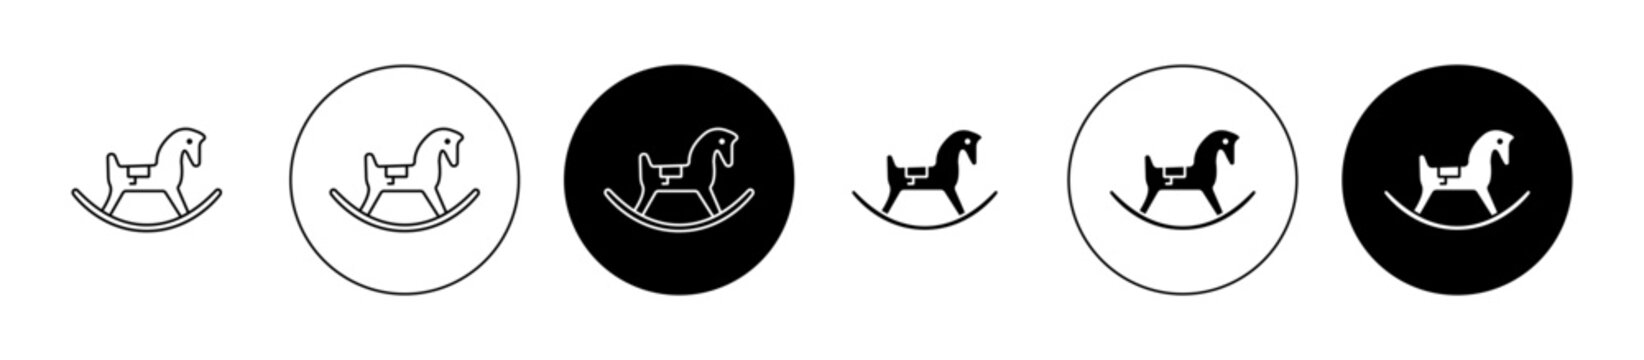 Rocking Horse Vector Icon Set. Carousel Chair Sign for UI Designs.